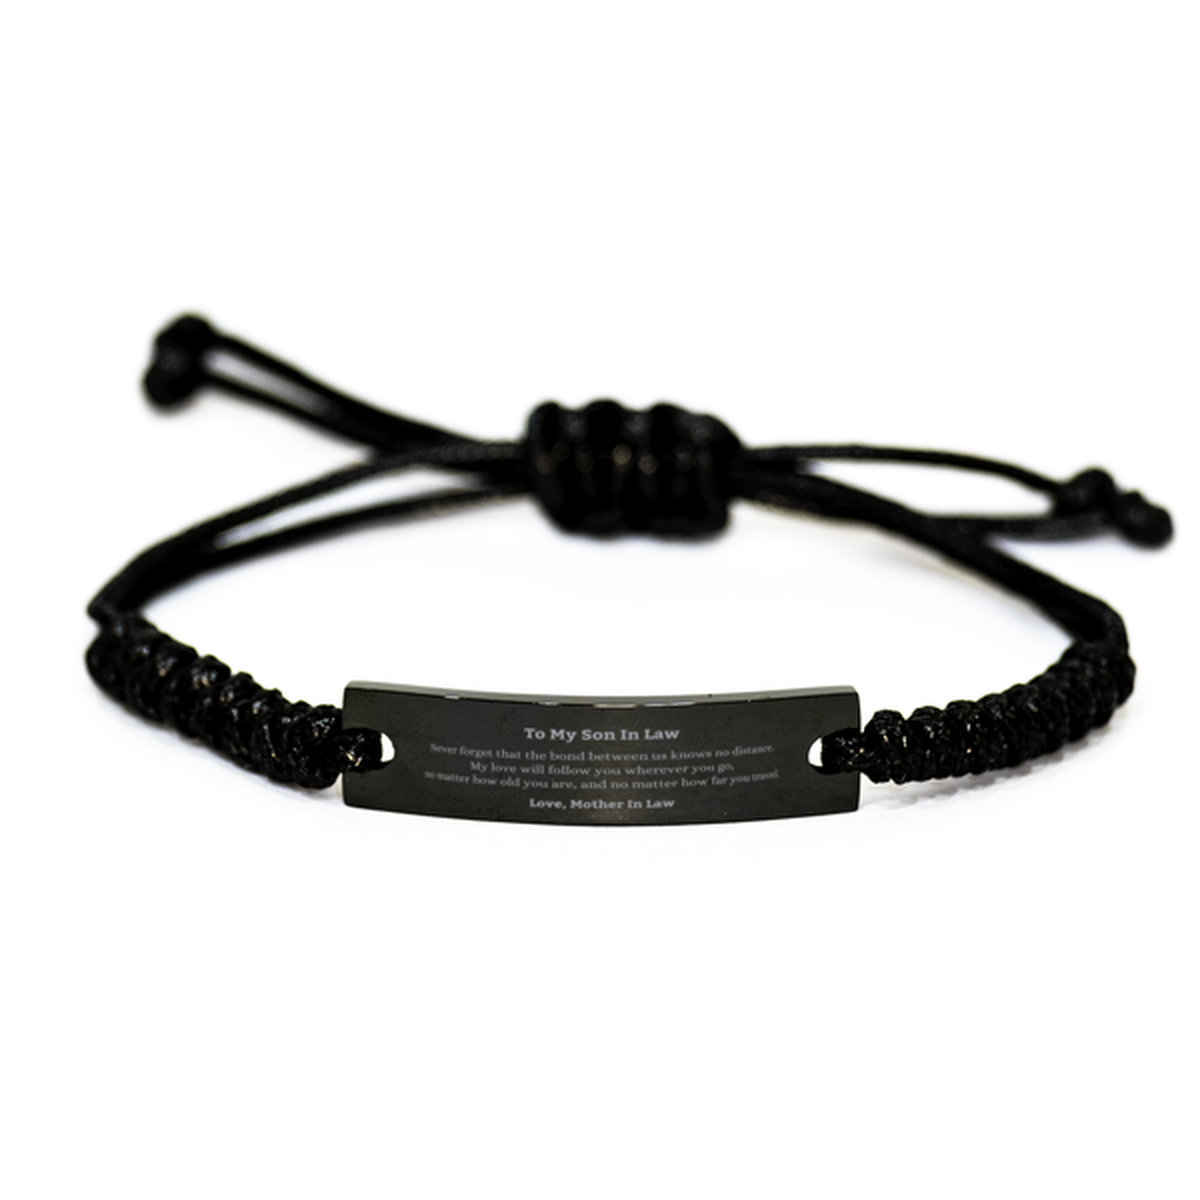 Son In Law Birthday Gifts from Mother In Law, Adjustable Black Rope Bracelet for Son In Law Christmas Graduation Unique Gifts Son In Law Never forget that the bond between us knows no distance. Love, Mother In Law